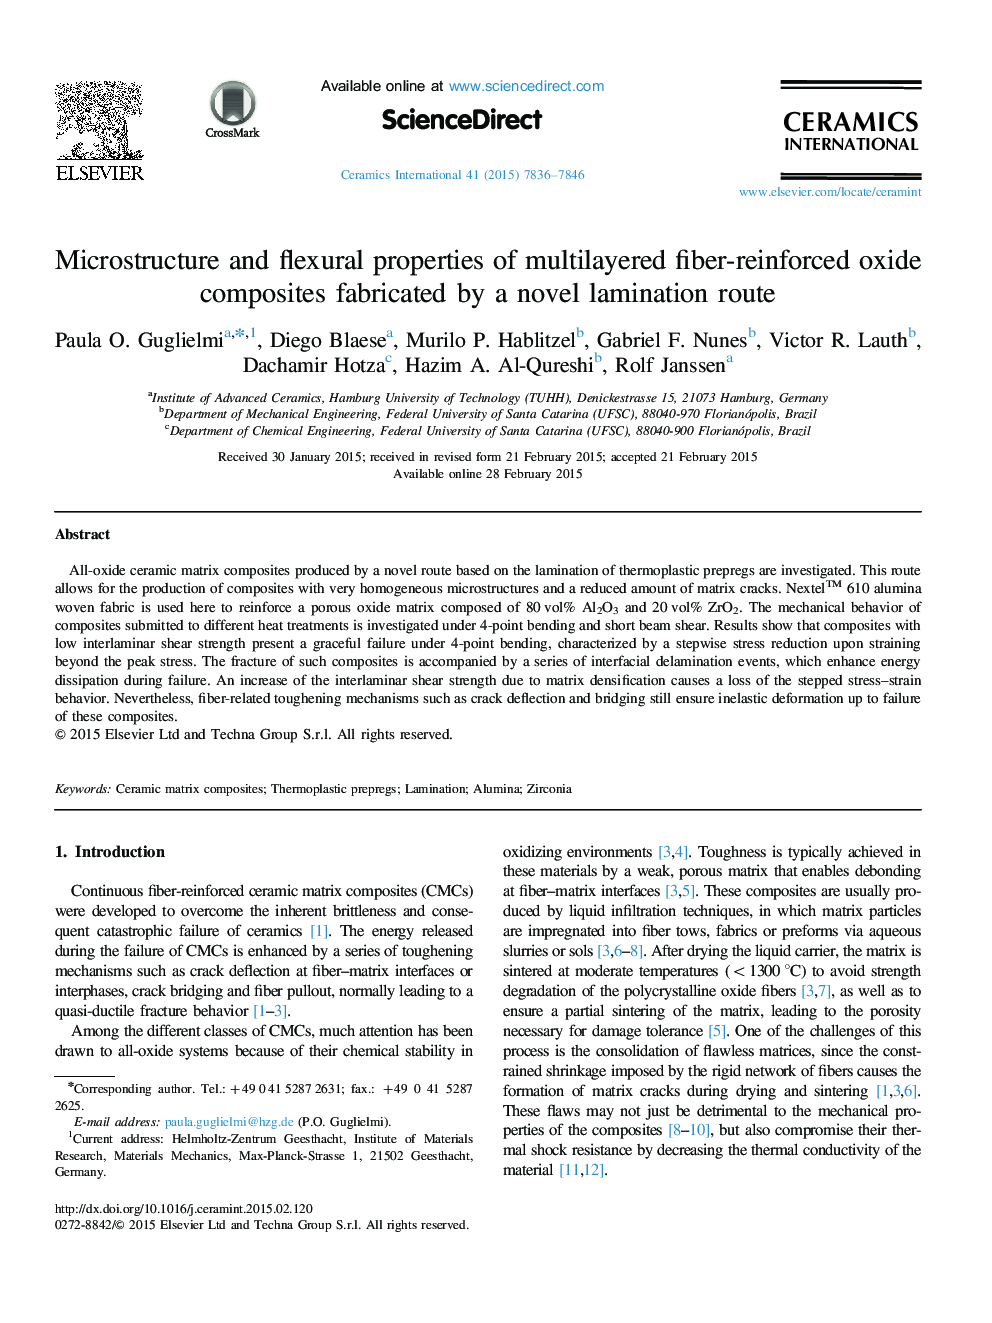 Microstructure and flexural properties of multilayered fiber-reinforced oxide composites fabricated by a novel lamination route